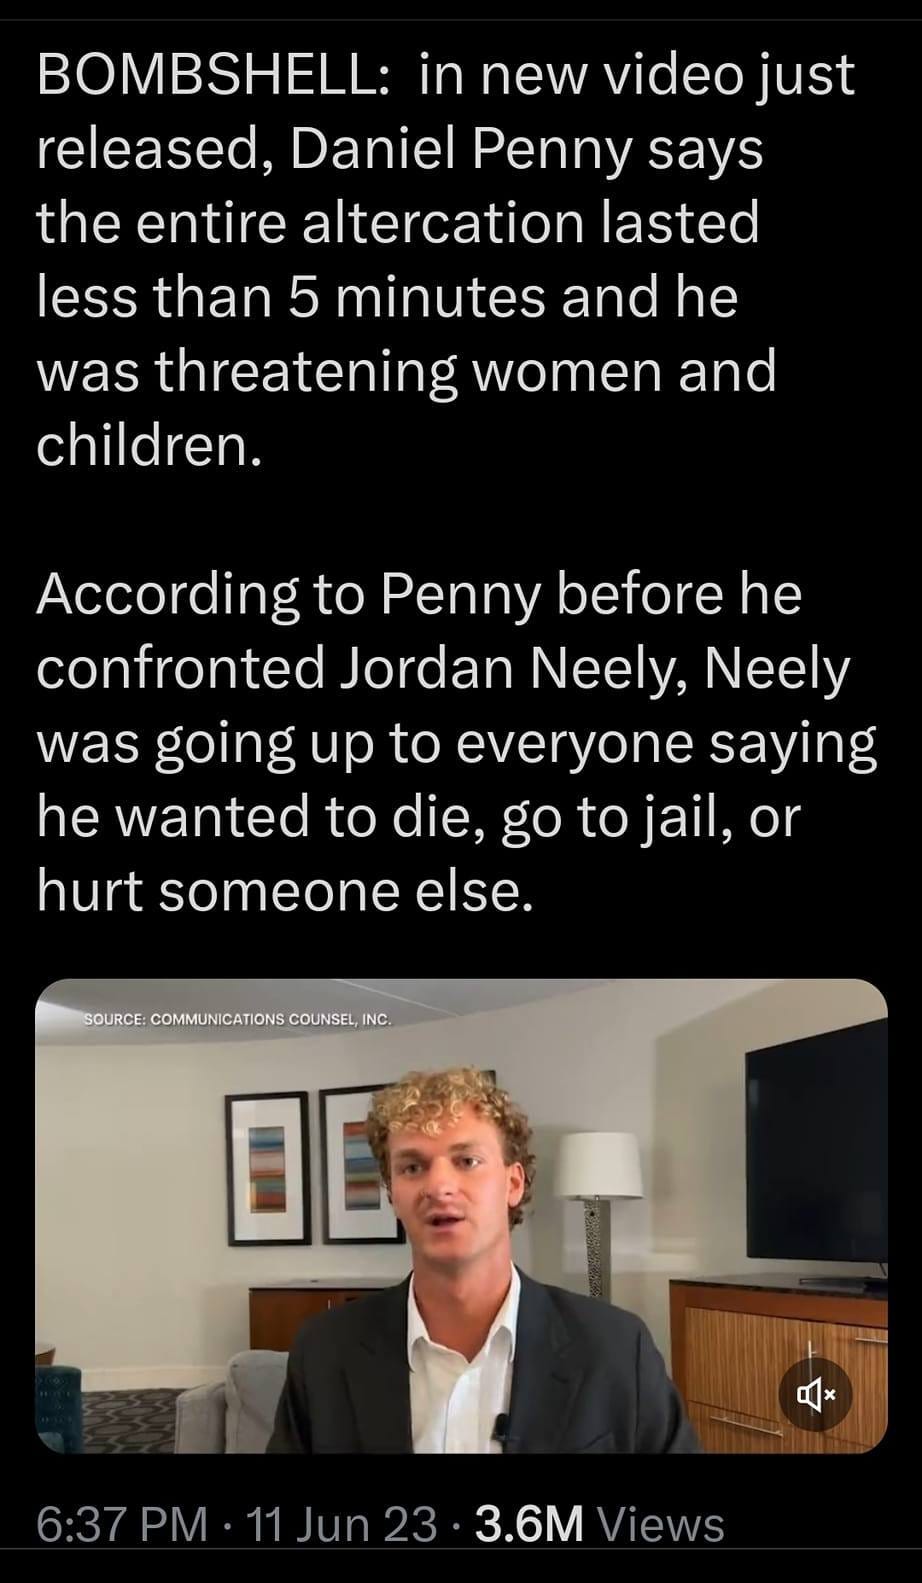 May be an image of 1 person and text that says '4:36 4GE 97% Thread BOMBSHELL: in new video just released, Daniel Penny says the entire altercation lasted less than 5 minutes and he was threatening women and children. According to Penny before he confronted Jordan Neely, Neely was going up to everyone saying he wanted to die, go to jail, or hurt someone else. COMMUNICATIONSCOUNSEL, OE 6:37PM-11Jun233.6MViews 6:37PM 11Jun23 3.6M iews y'